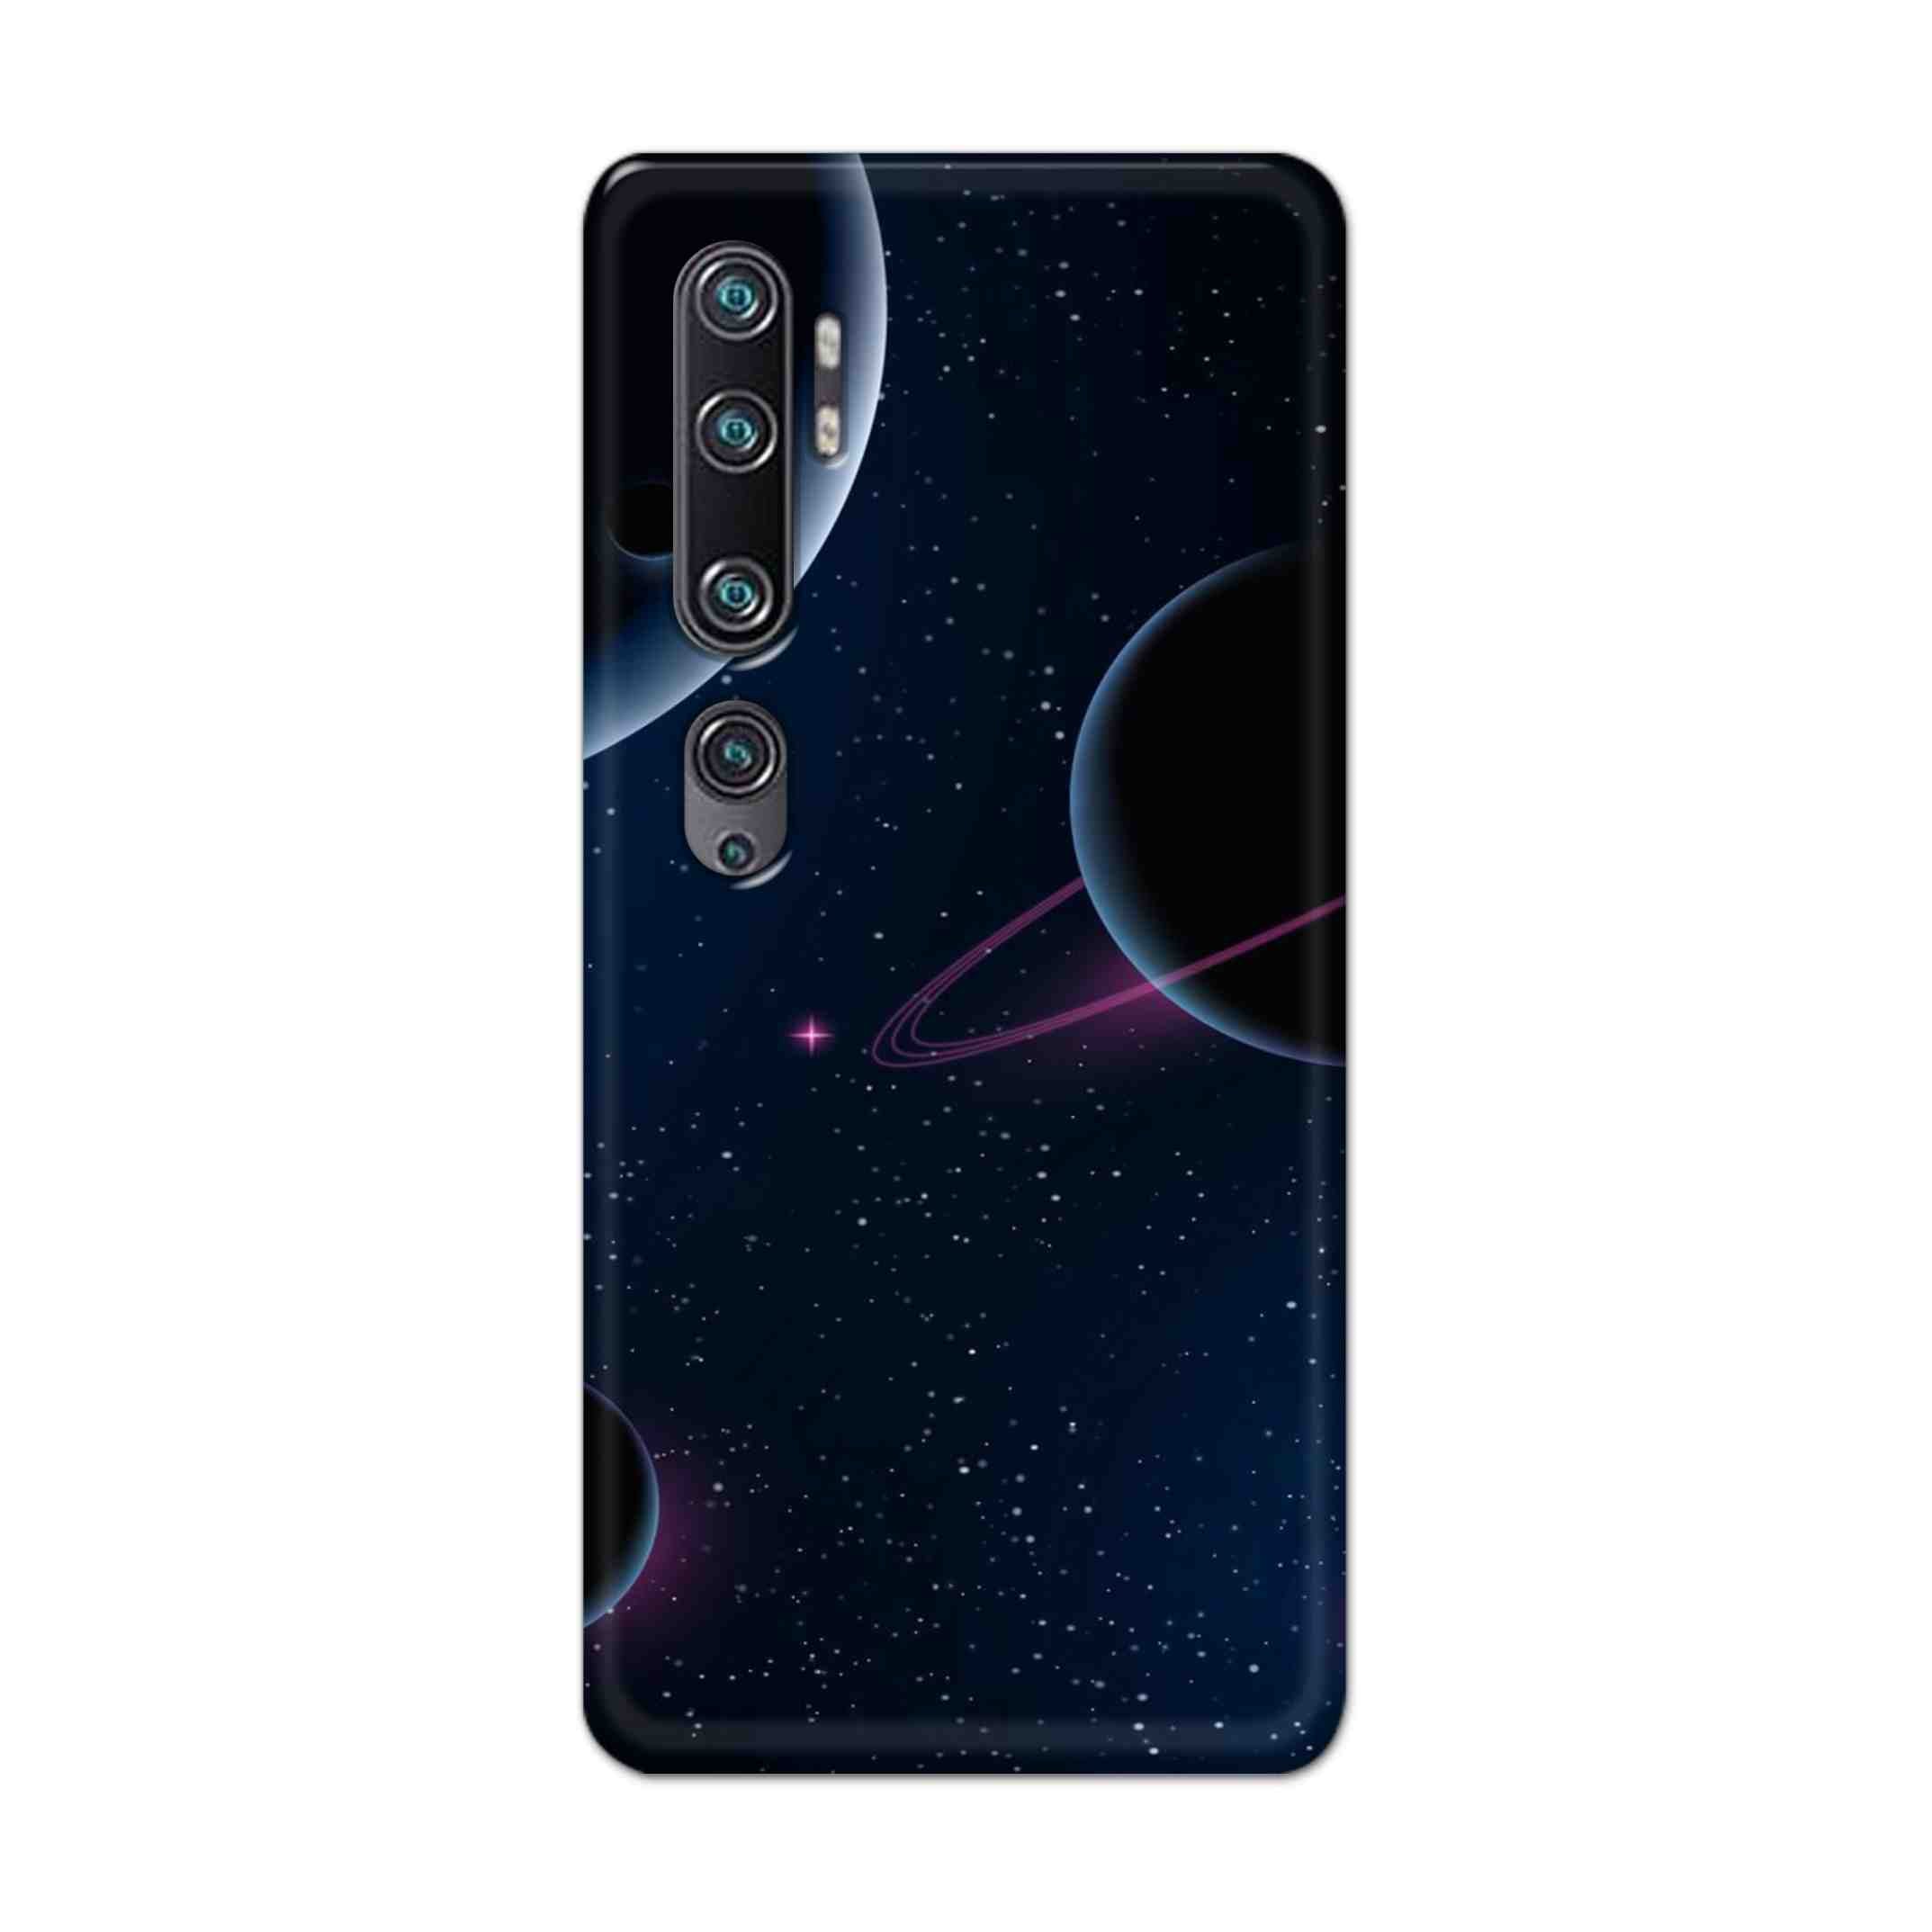 Buy Night Space Hard Back Mobile Phone Case Cover For Xiaomi Mi Note 10 Pro Online